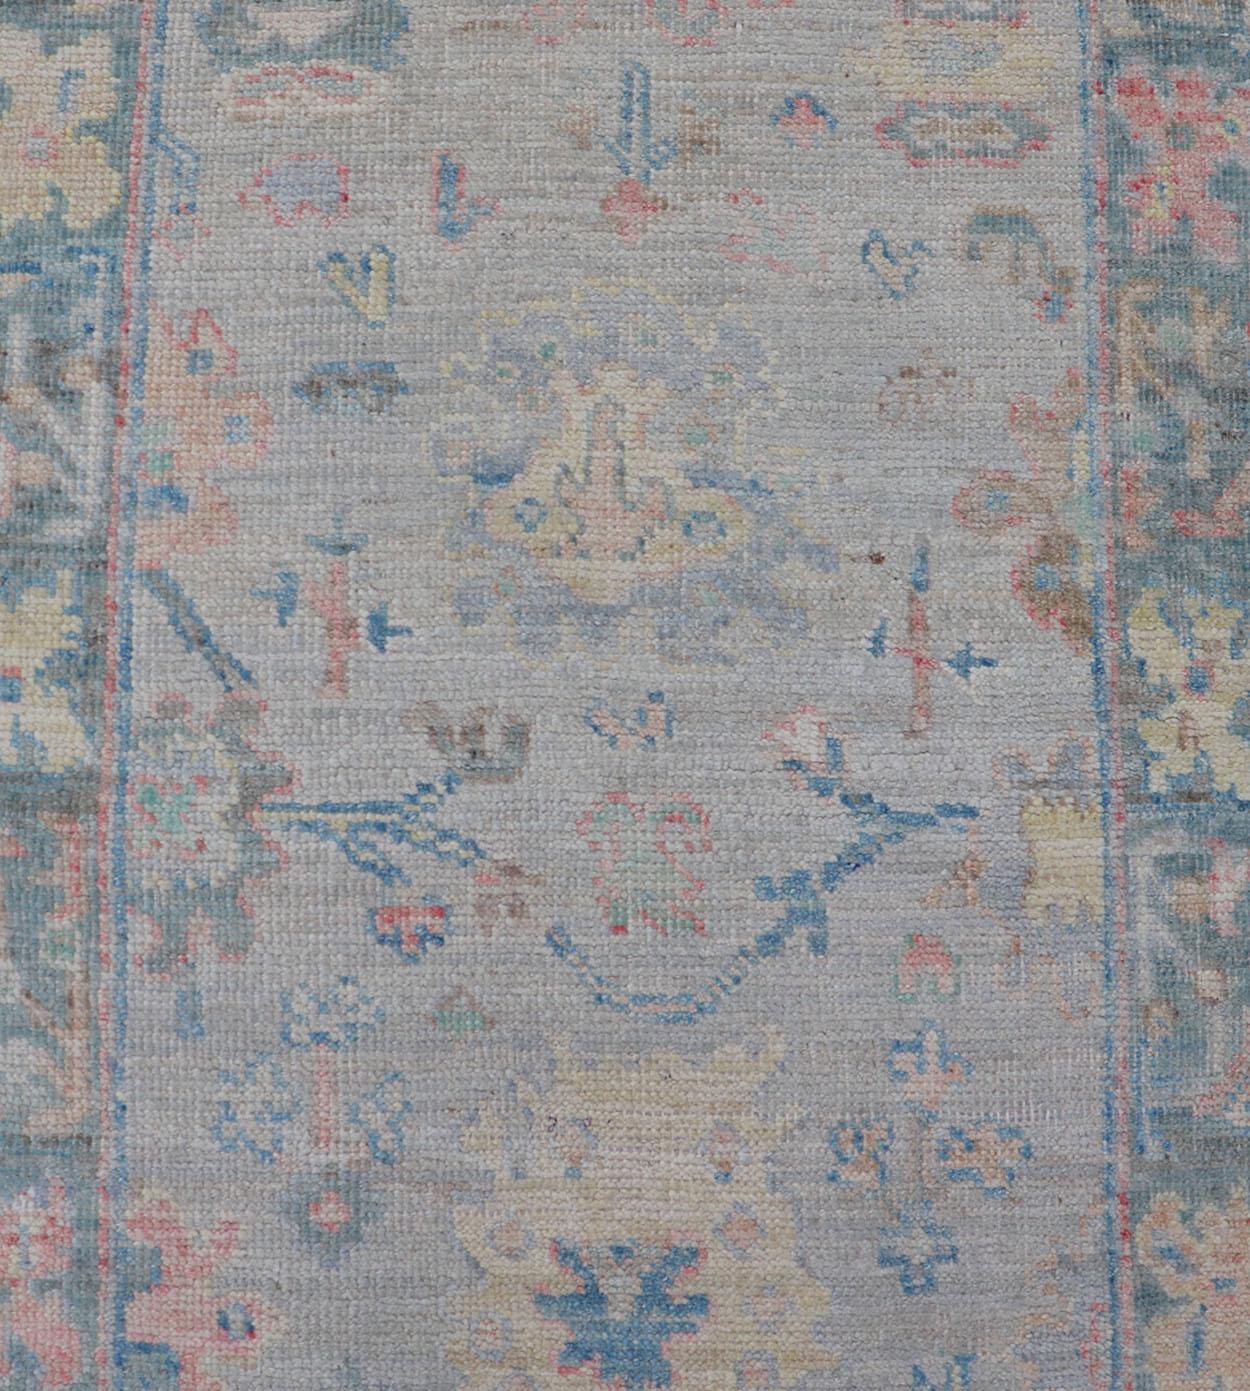 Measures: 2'5 x 9'10 
Hand-Knotted Modern Oushak Runner on Light Gray Field and Colorful Motifs. Keivan Woven Arts; rug AWR-12648 Country of Origin: Afghanistan Type: Oushak Design: Floral, All-Over, Arabesque 21st Century 

This Oushak runner